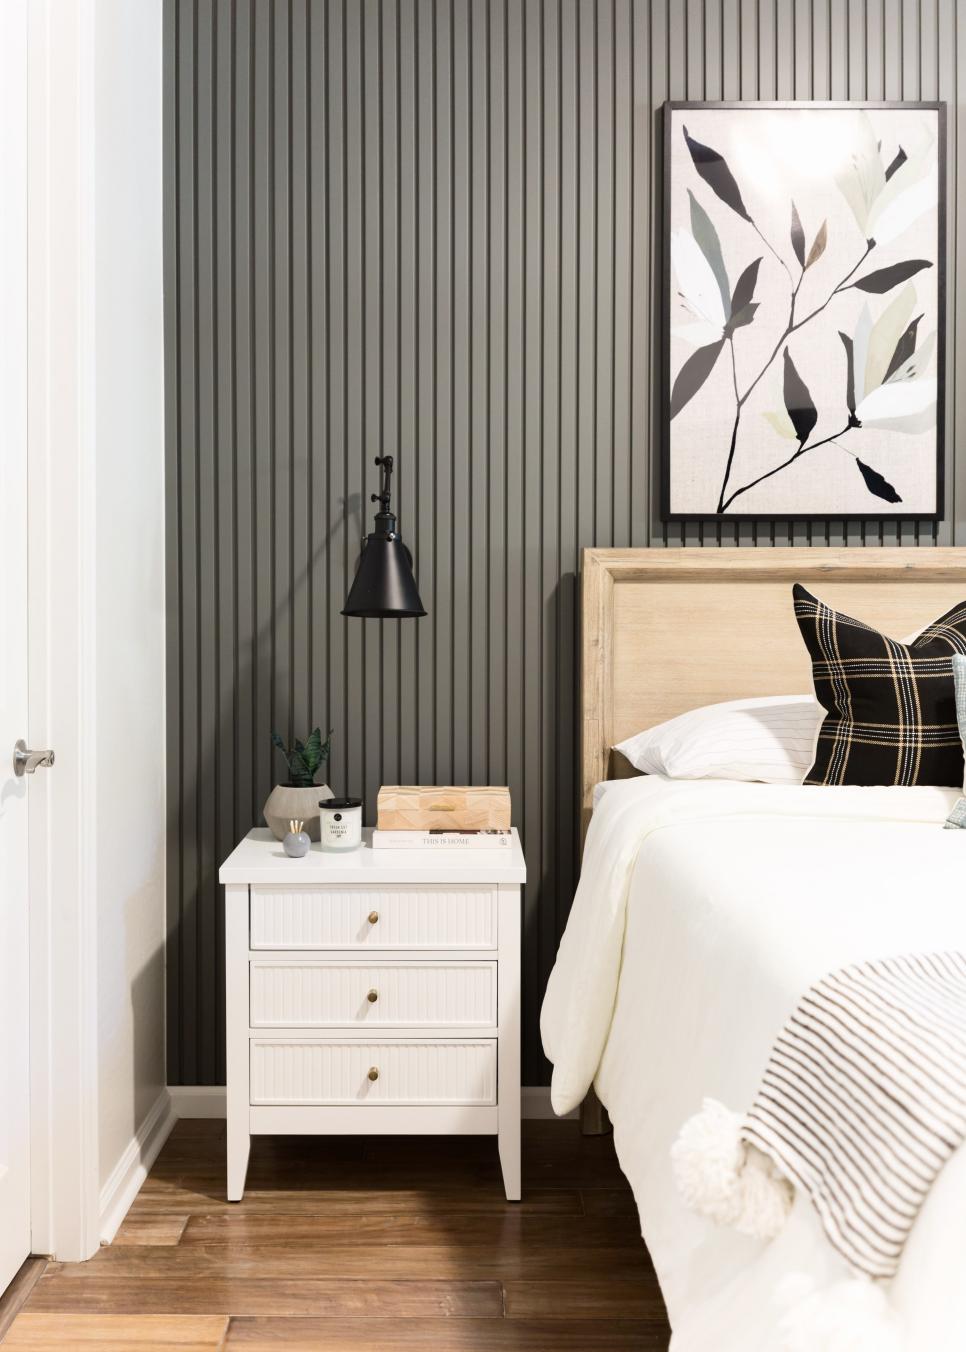 Gray Guest Bedroom With Striped Wall | HGTV